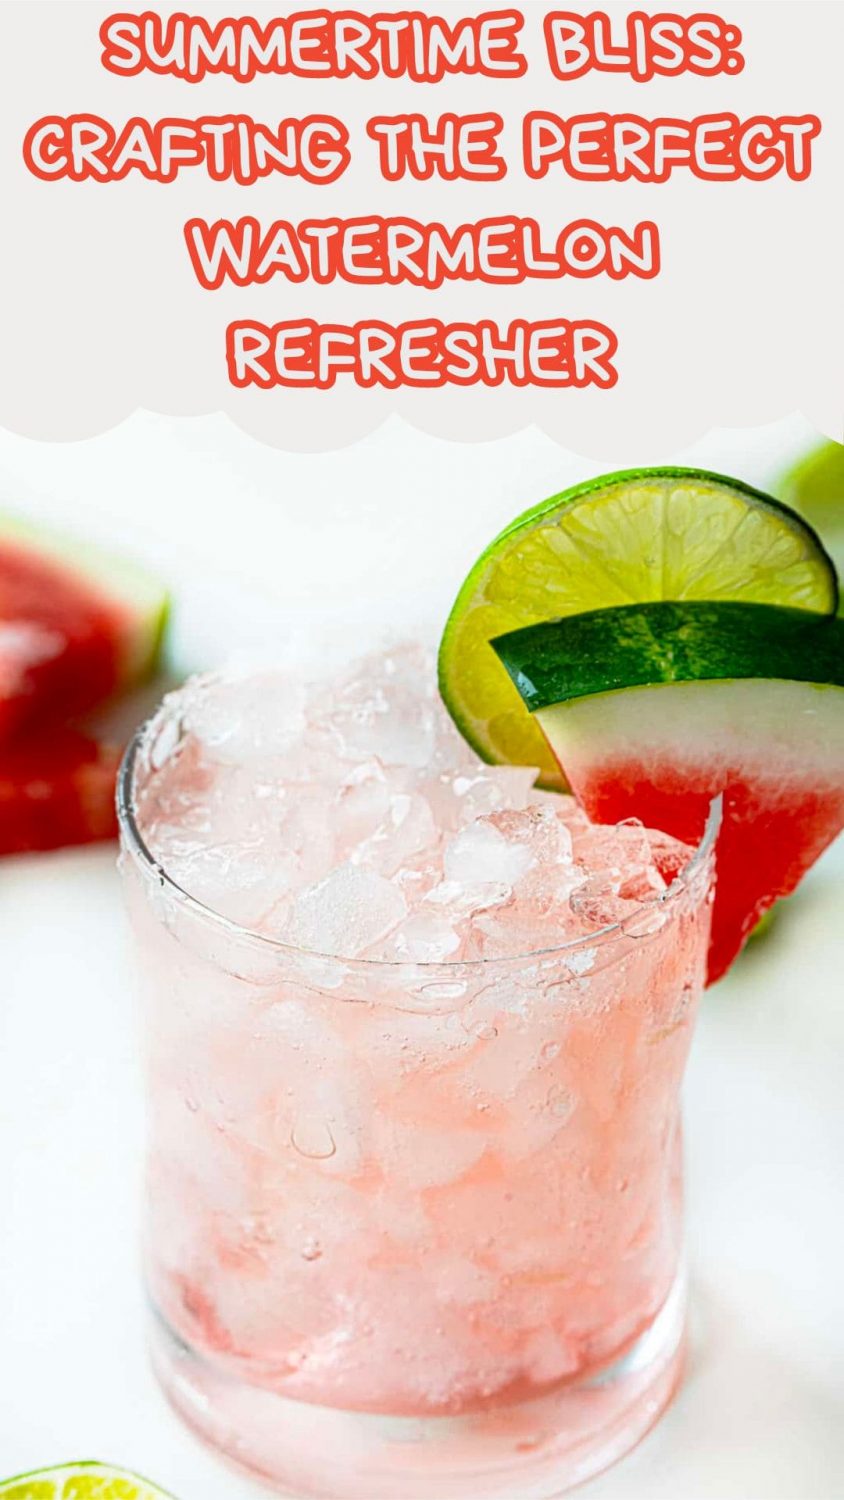 Summertime Bliss: Crafting the Perfect Watermelon Refresher